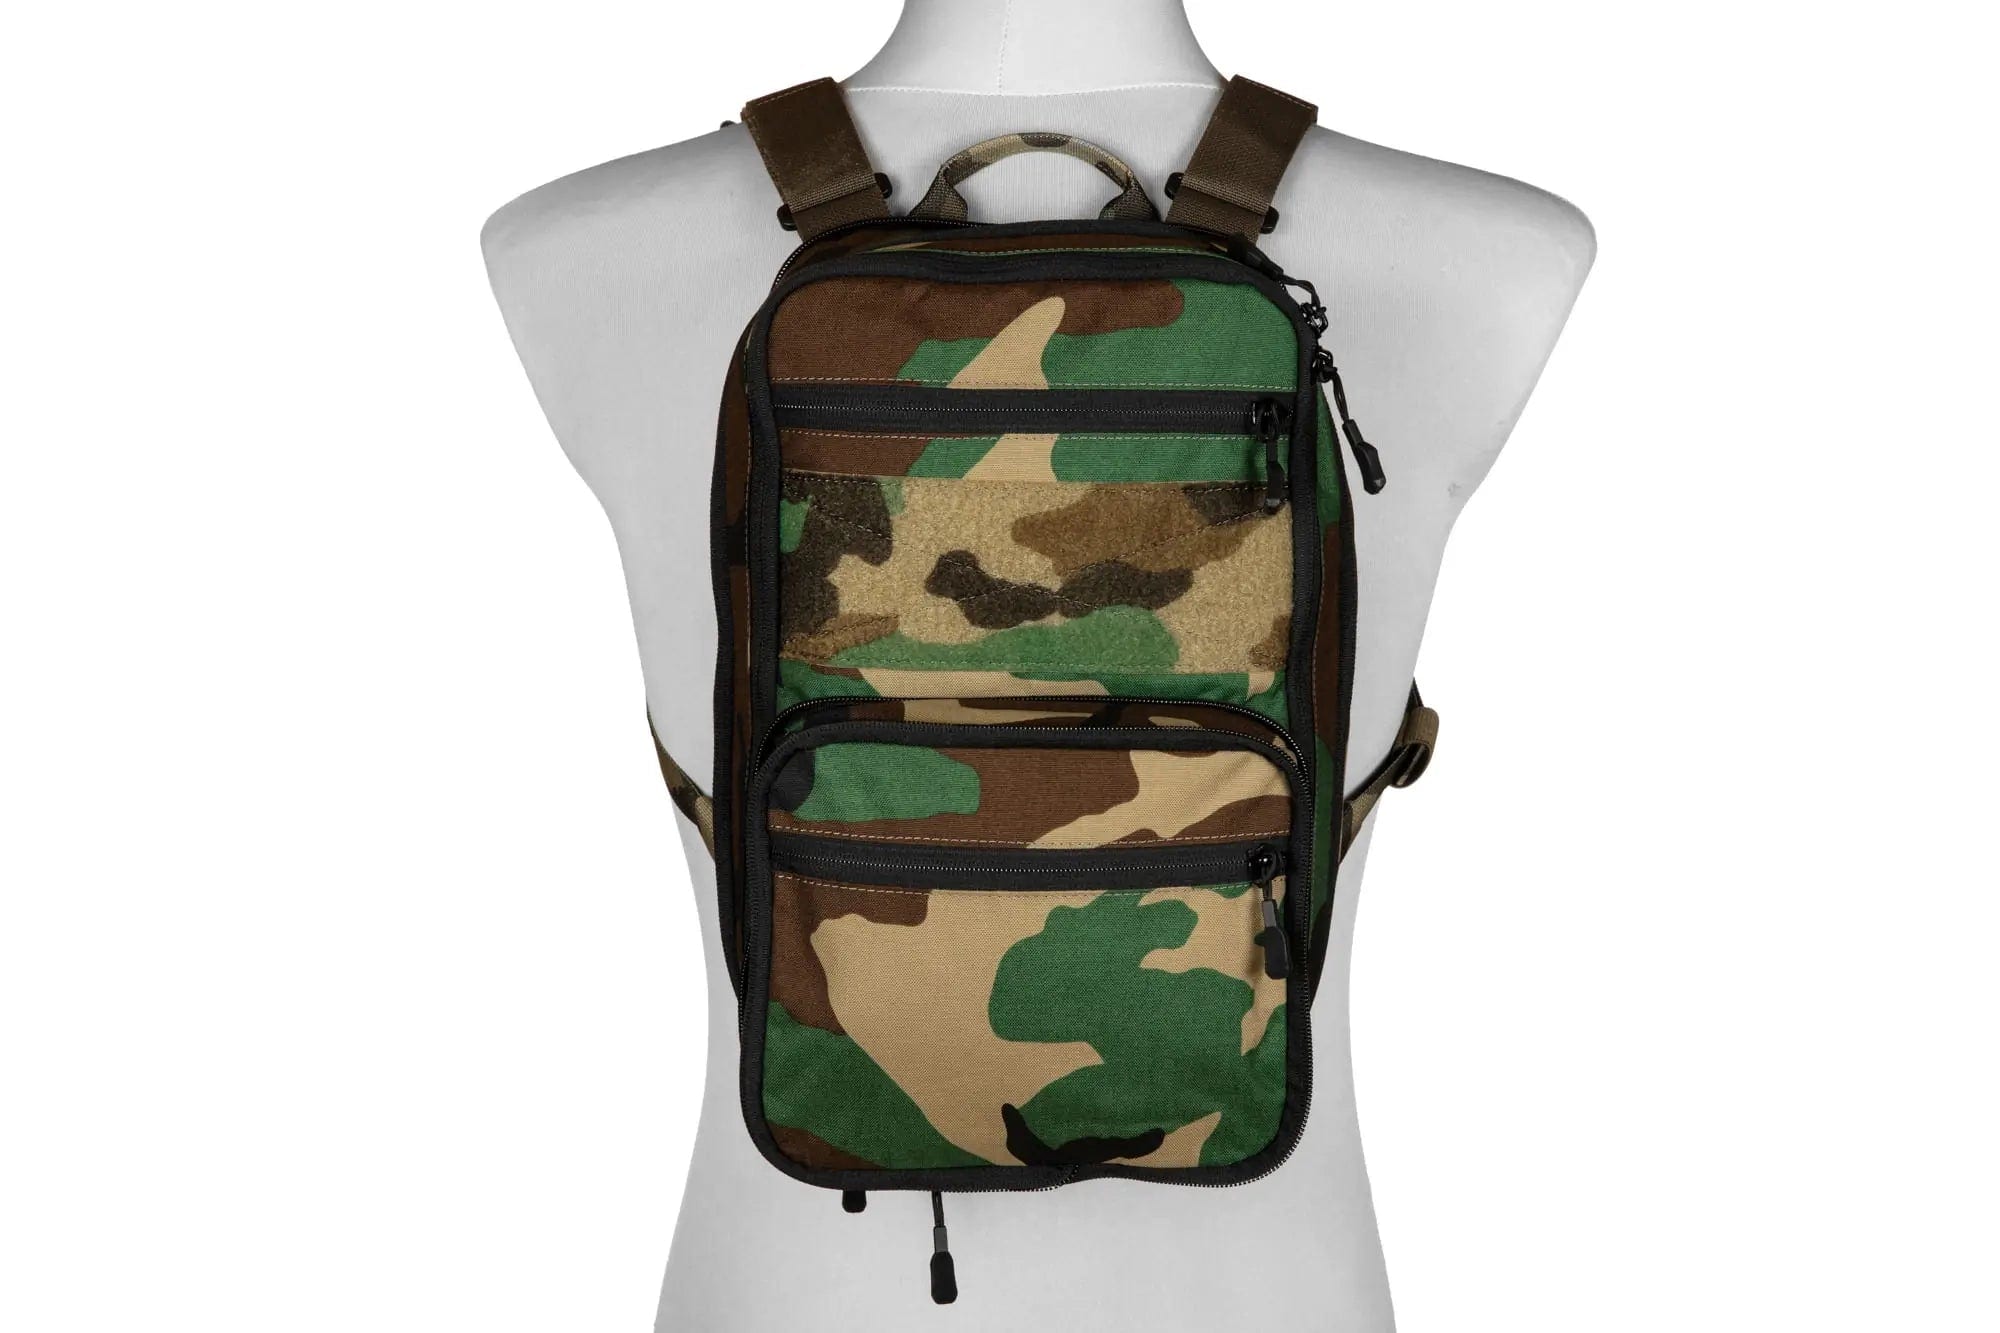 LV/119 Plate Carrier Ranger Green - Pew Tactical